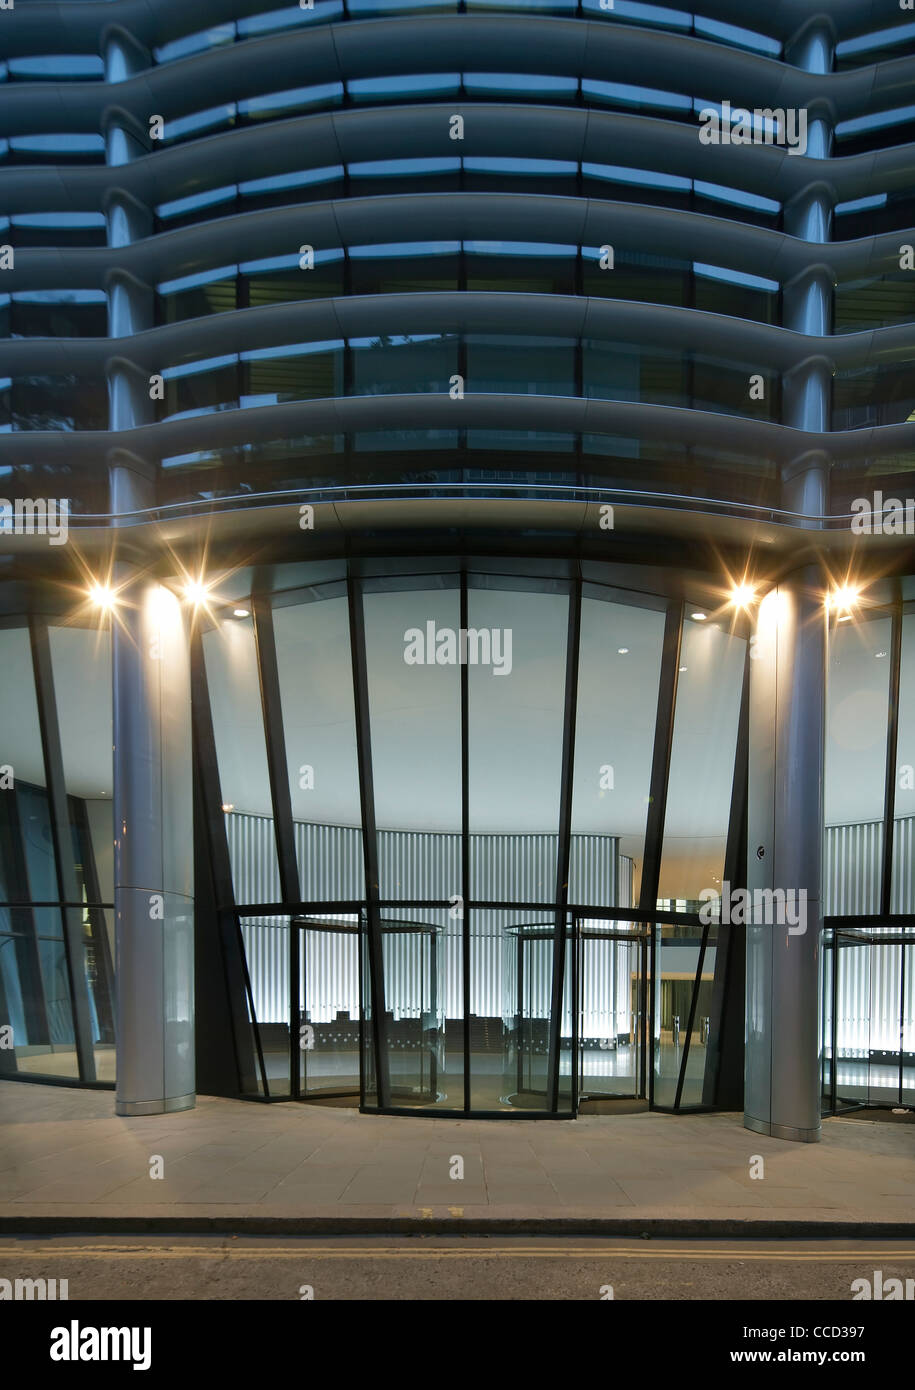 the walbrook, foster + partners, london 2009, exterior view of revolving doors Stock Photo